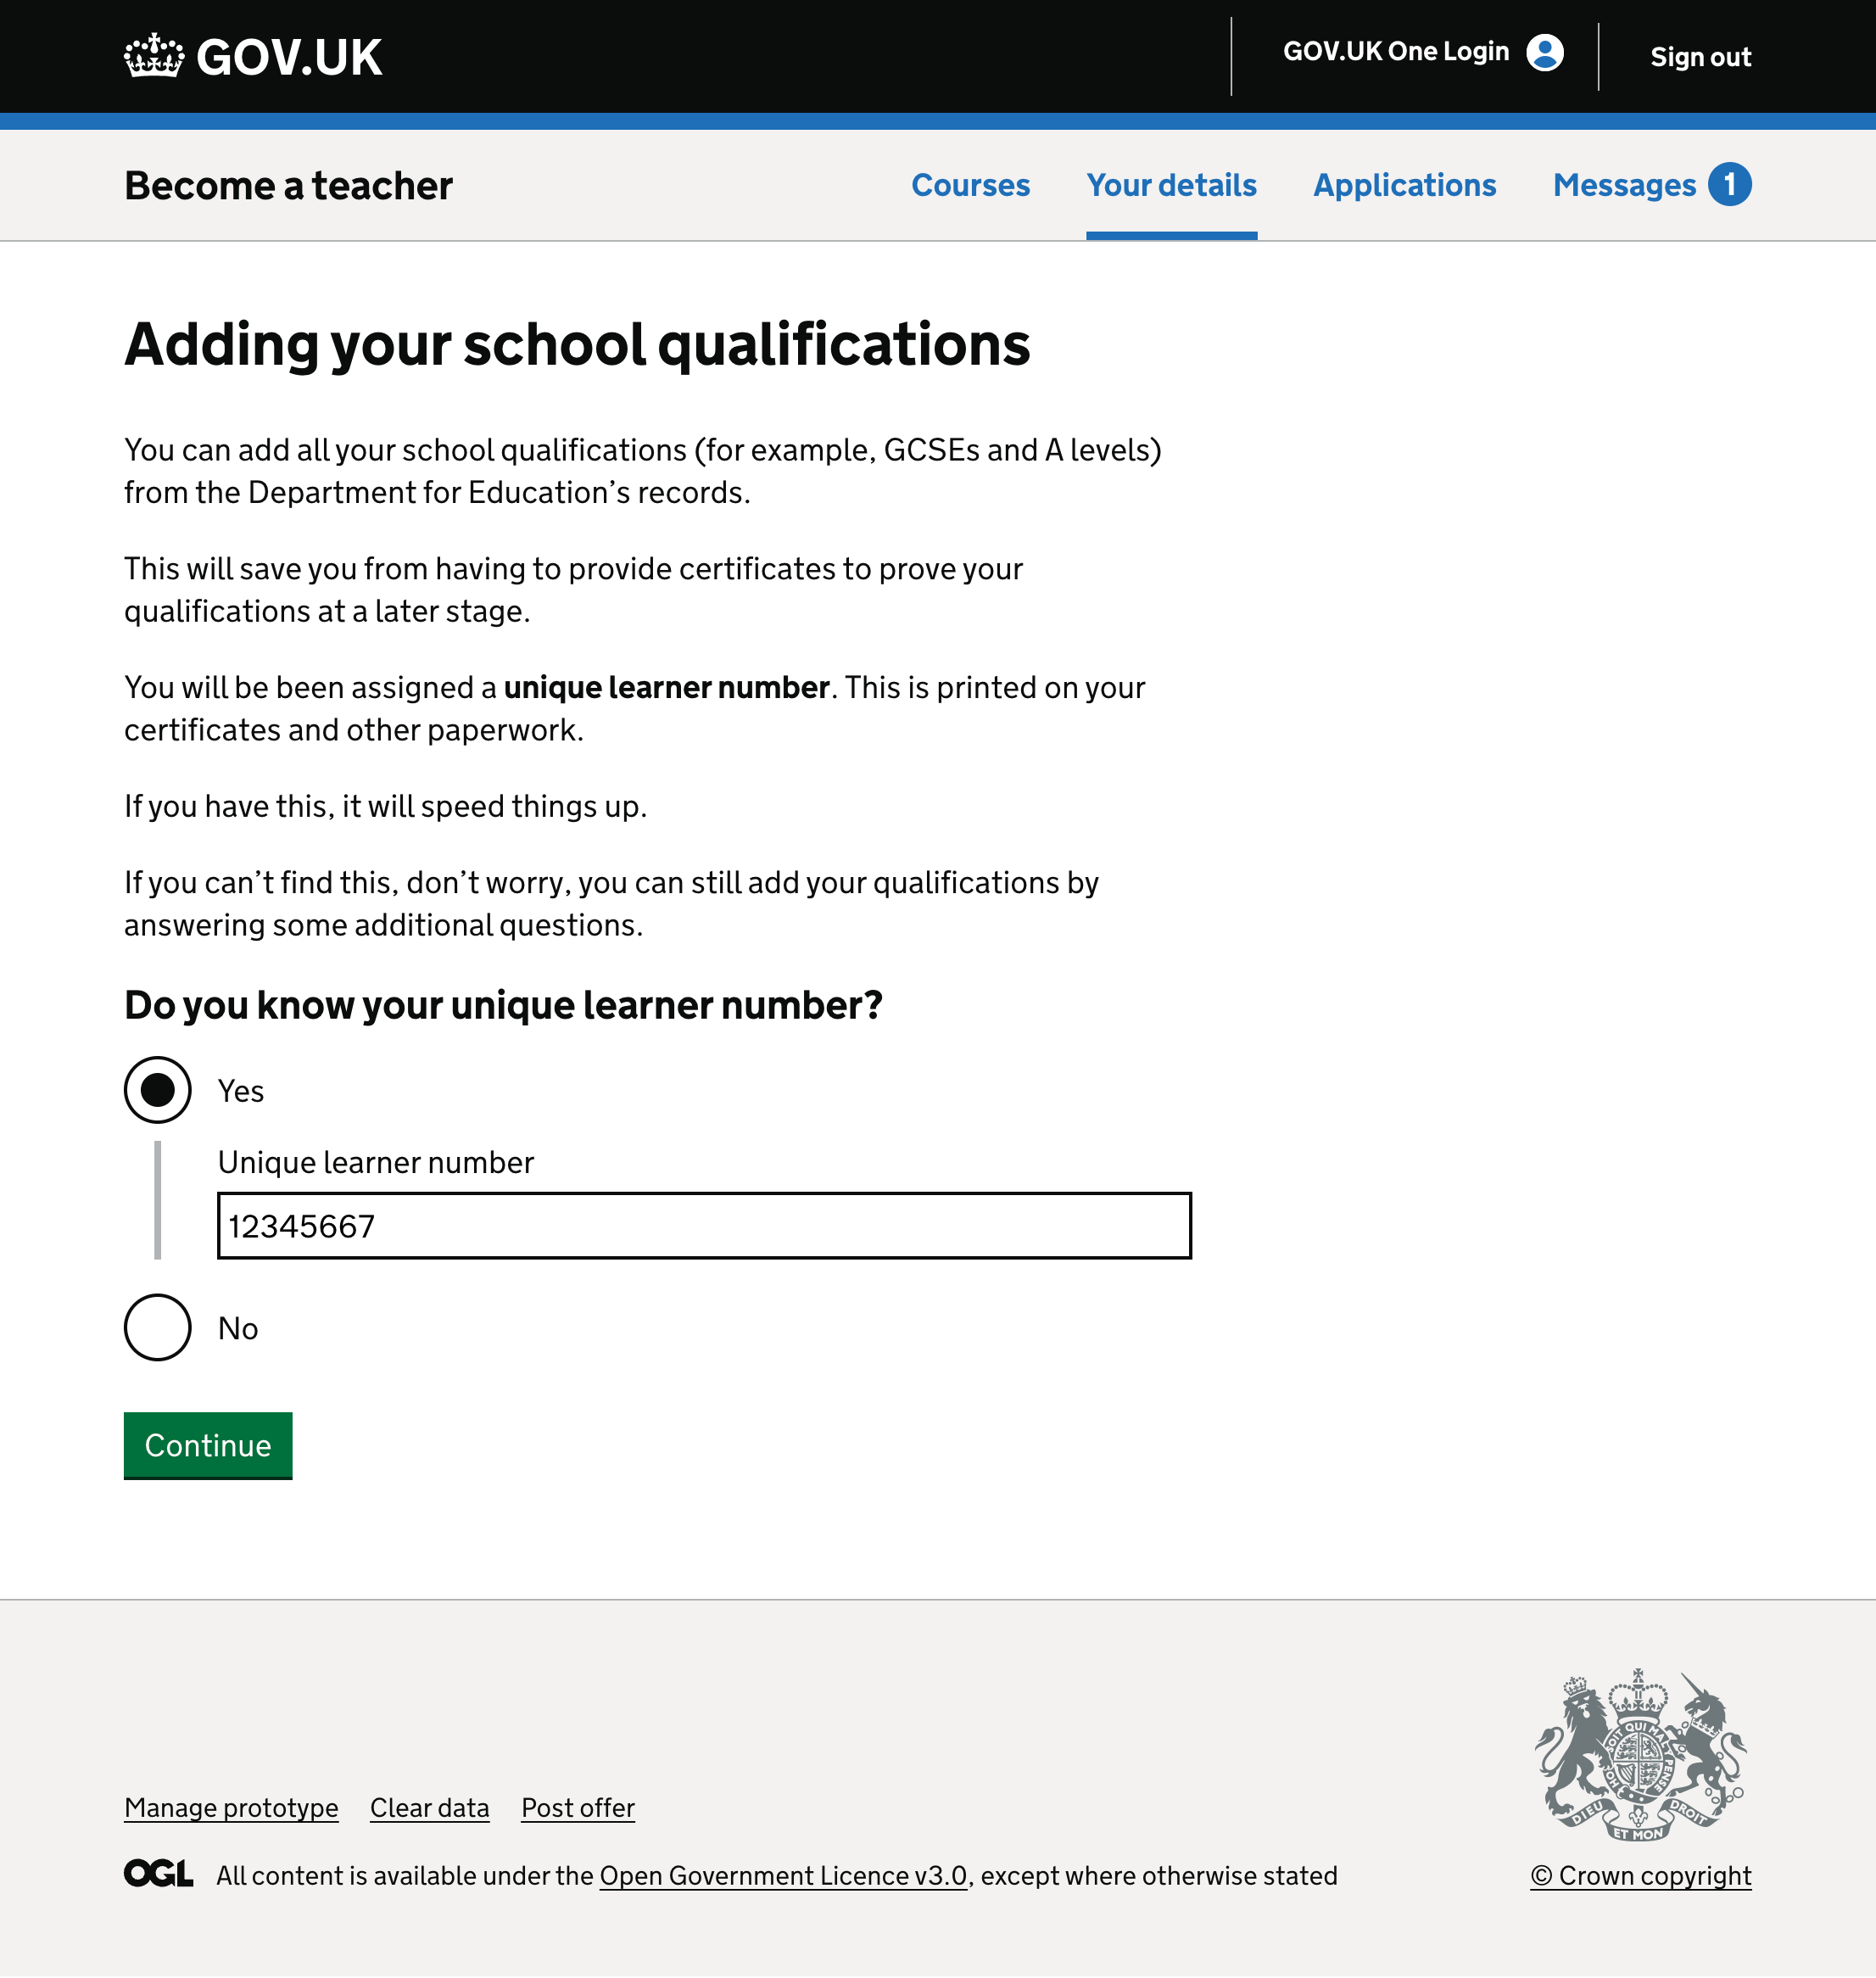 Screenshot showing a page asking for a unique learner number